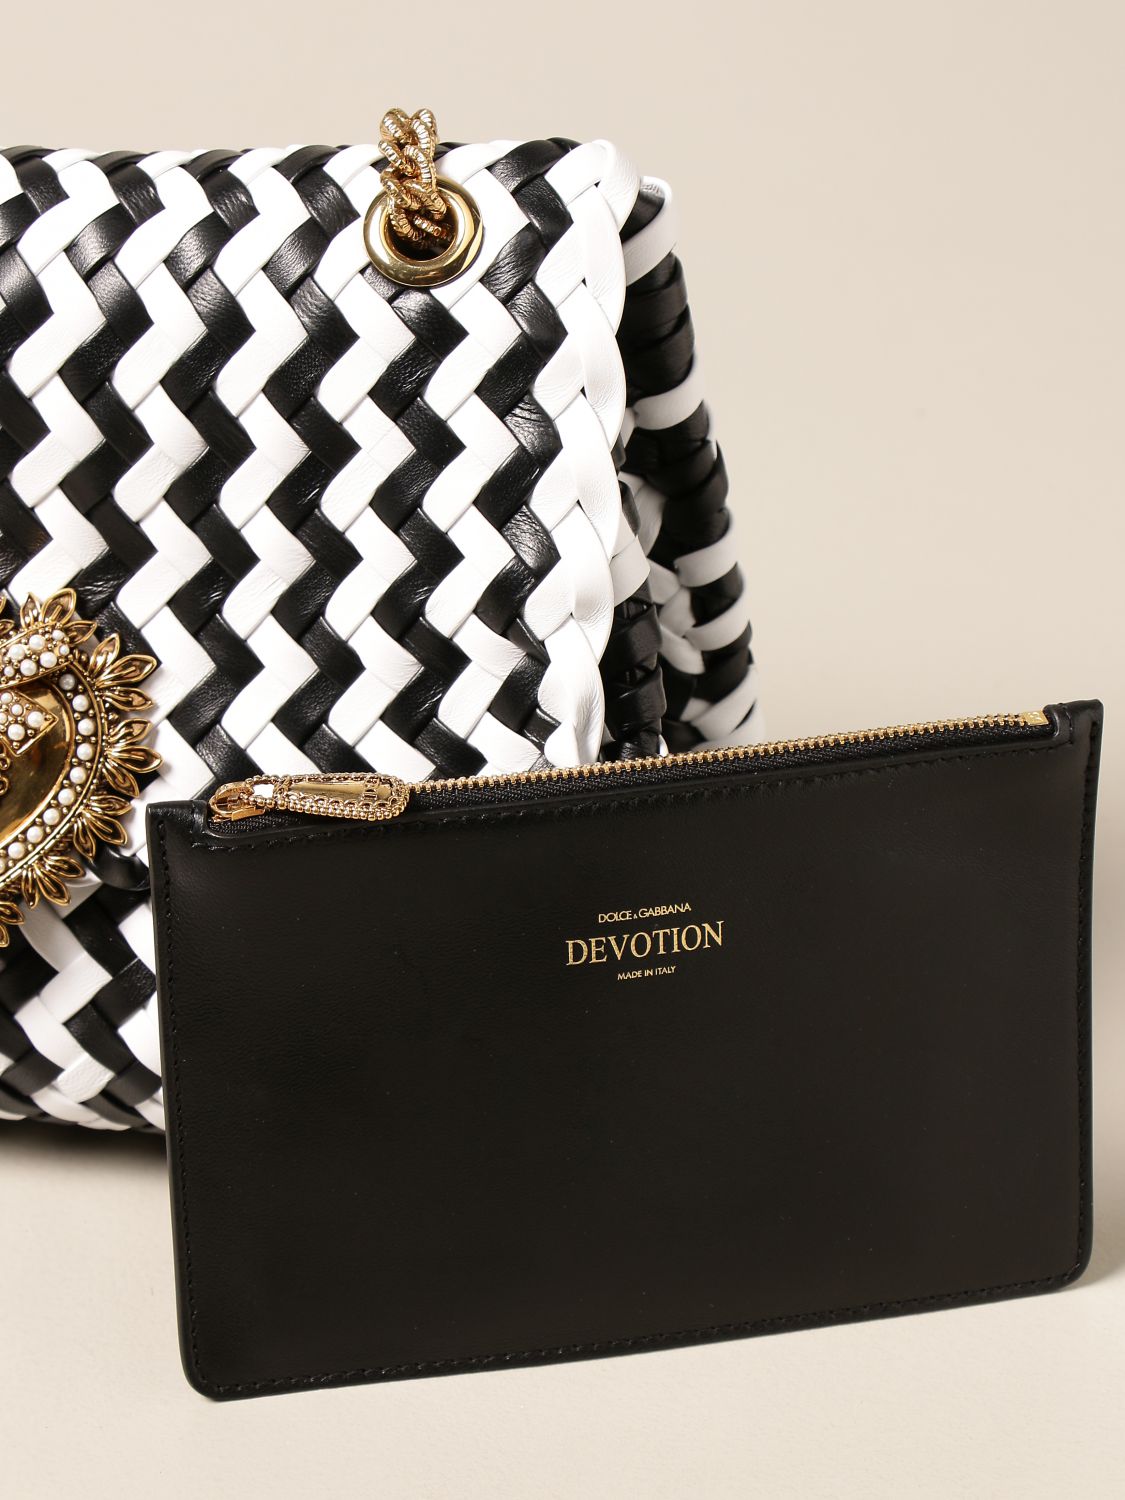 Dolce & Gabbana Devotion bag in two-tone woven leather